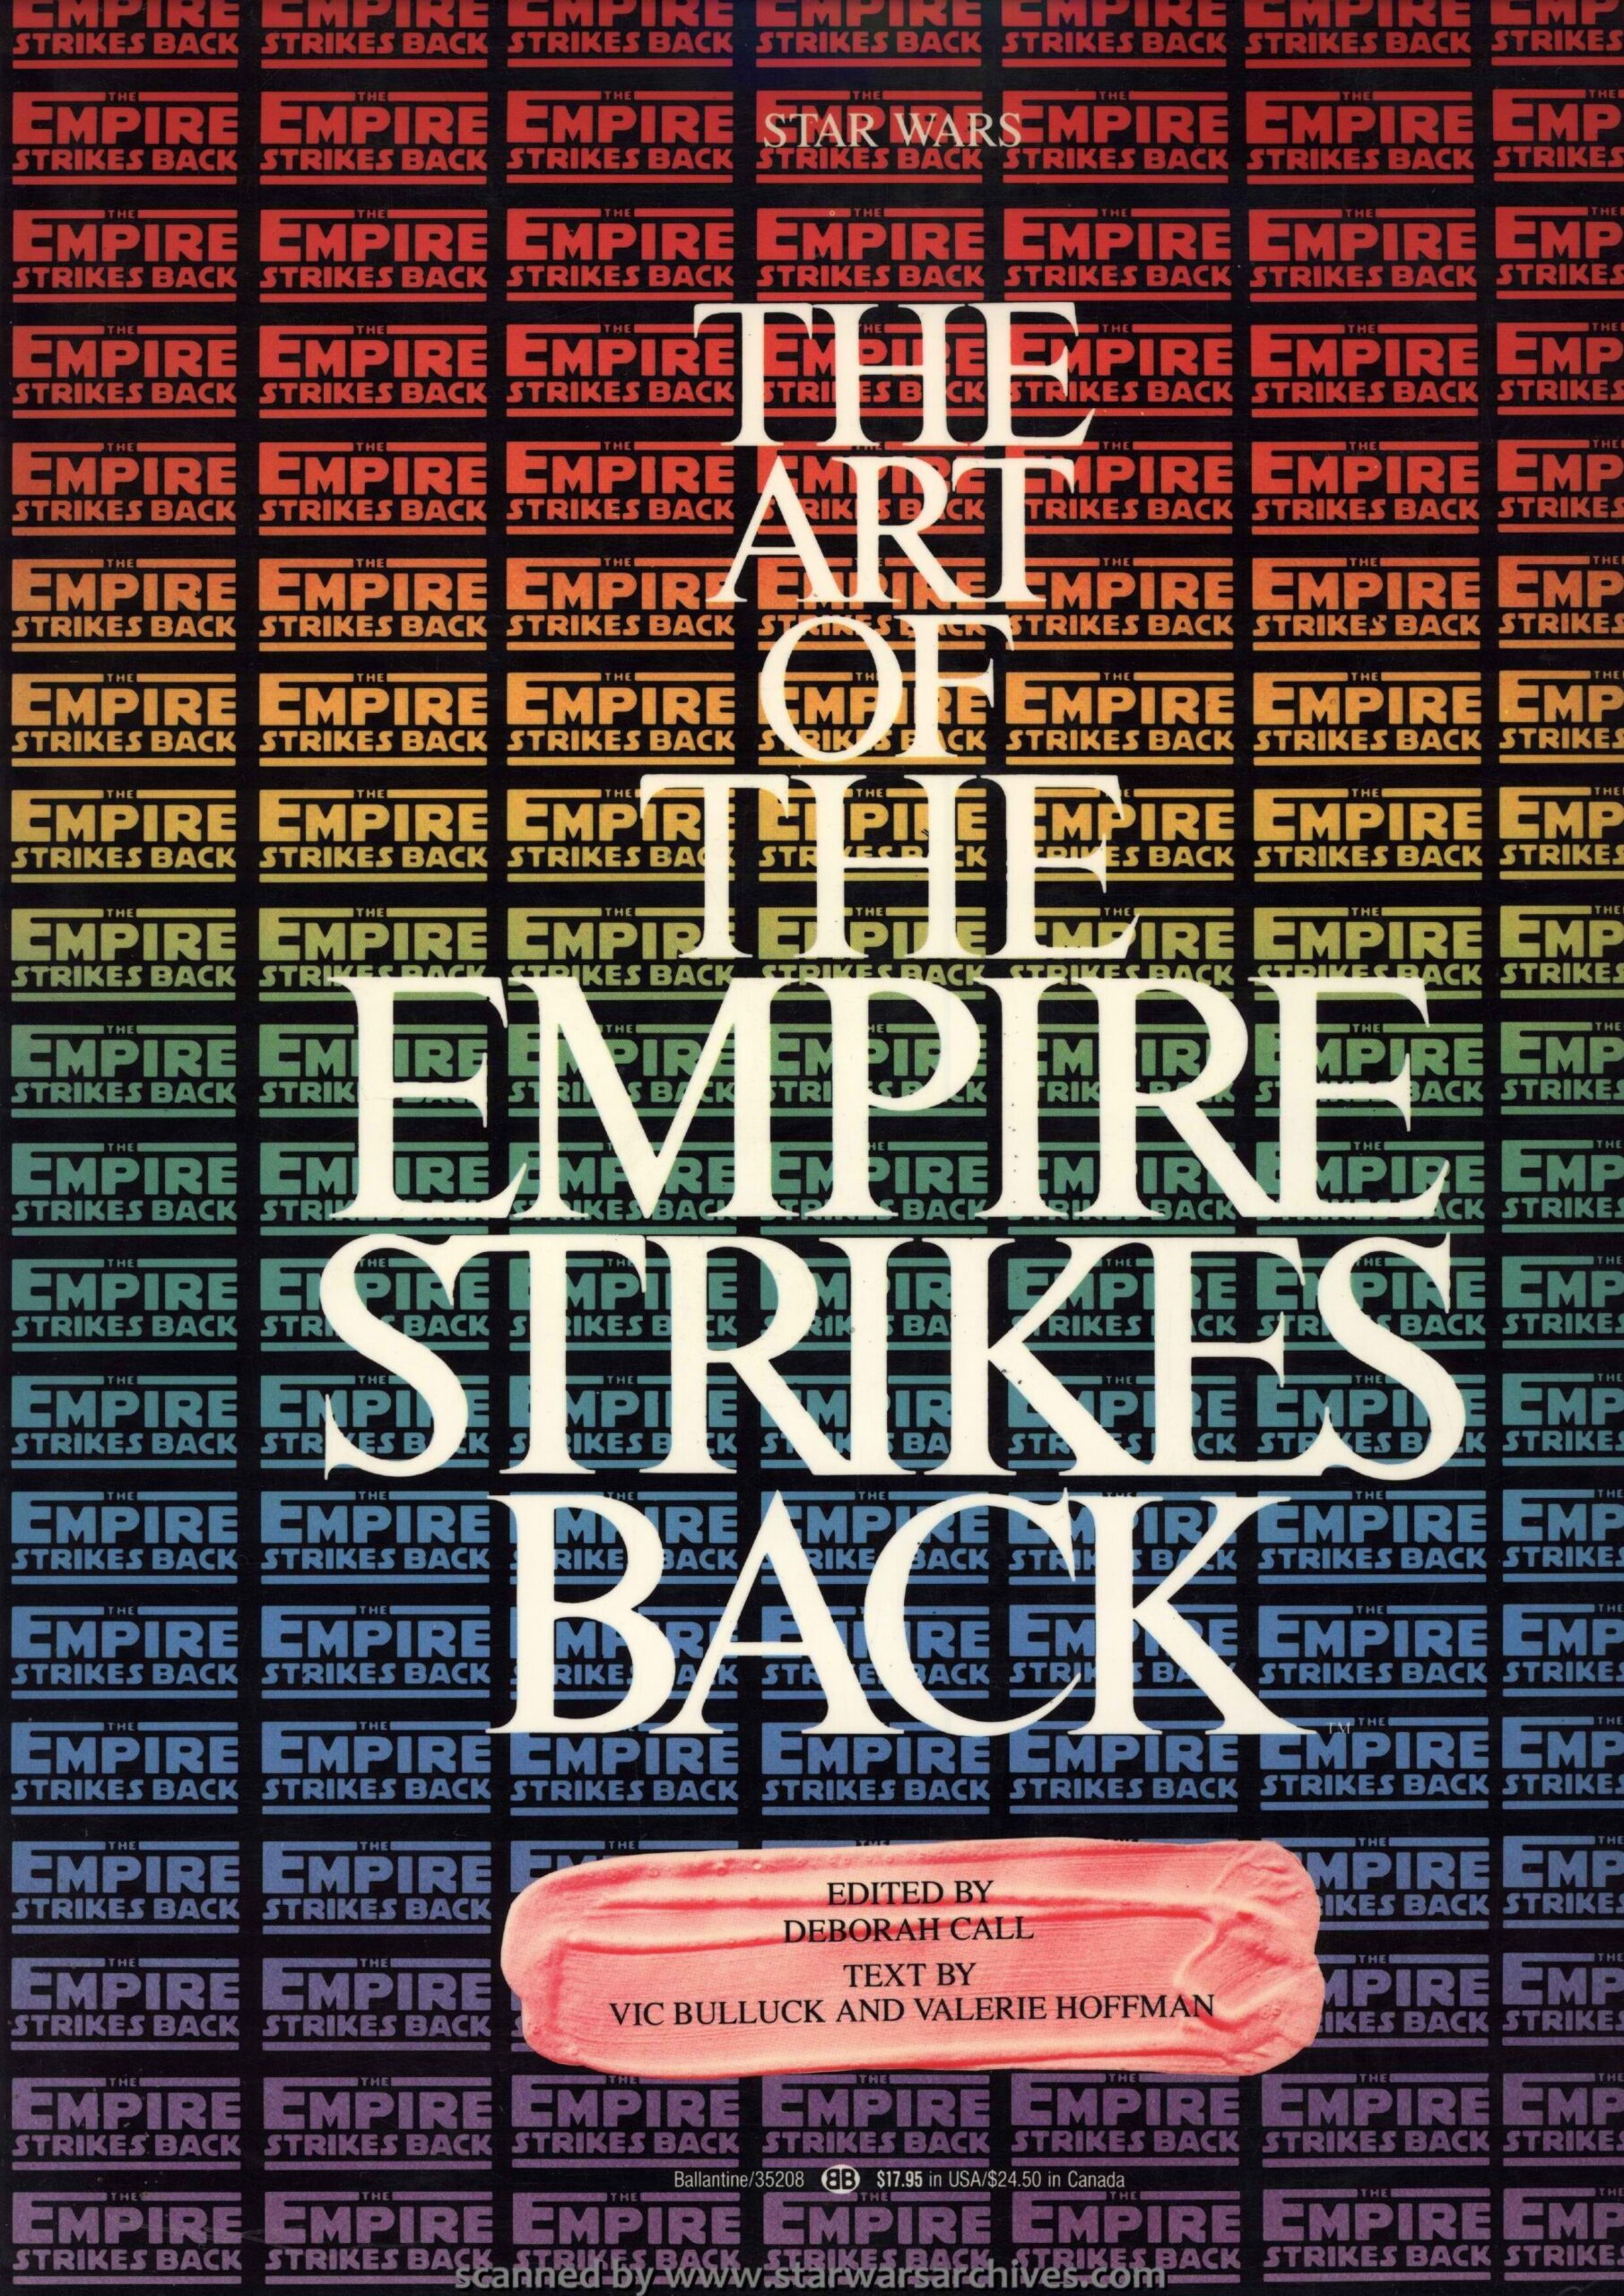 Star Wars – The Art of The Empire Strikes Back (1980)